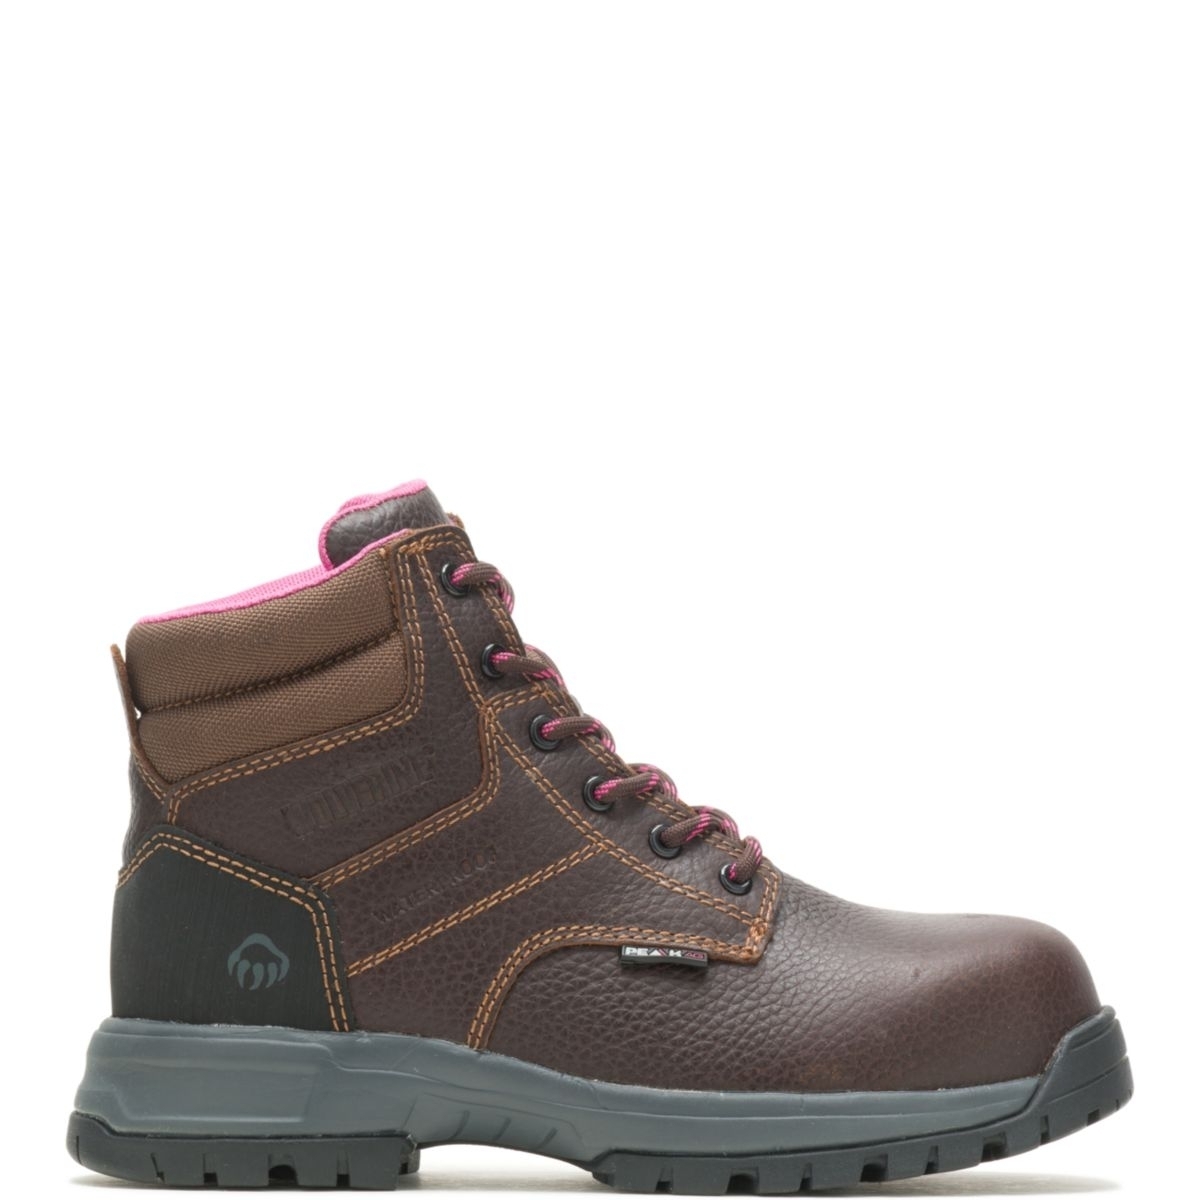 WOLVERINE Women's Piper Composite Toe Work Boot Brown - W10180 BROWN - BROWN, 10-D